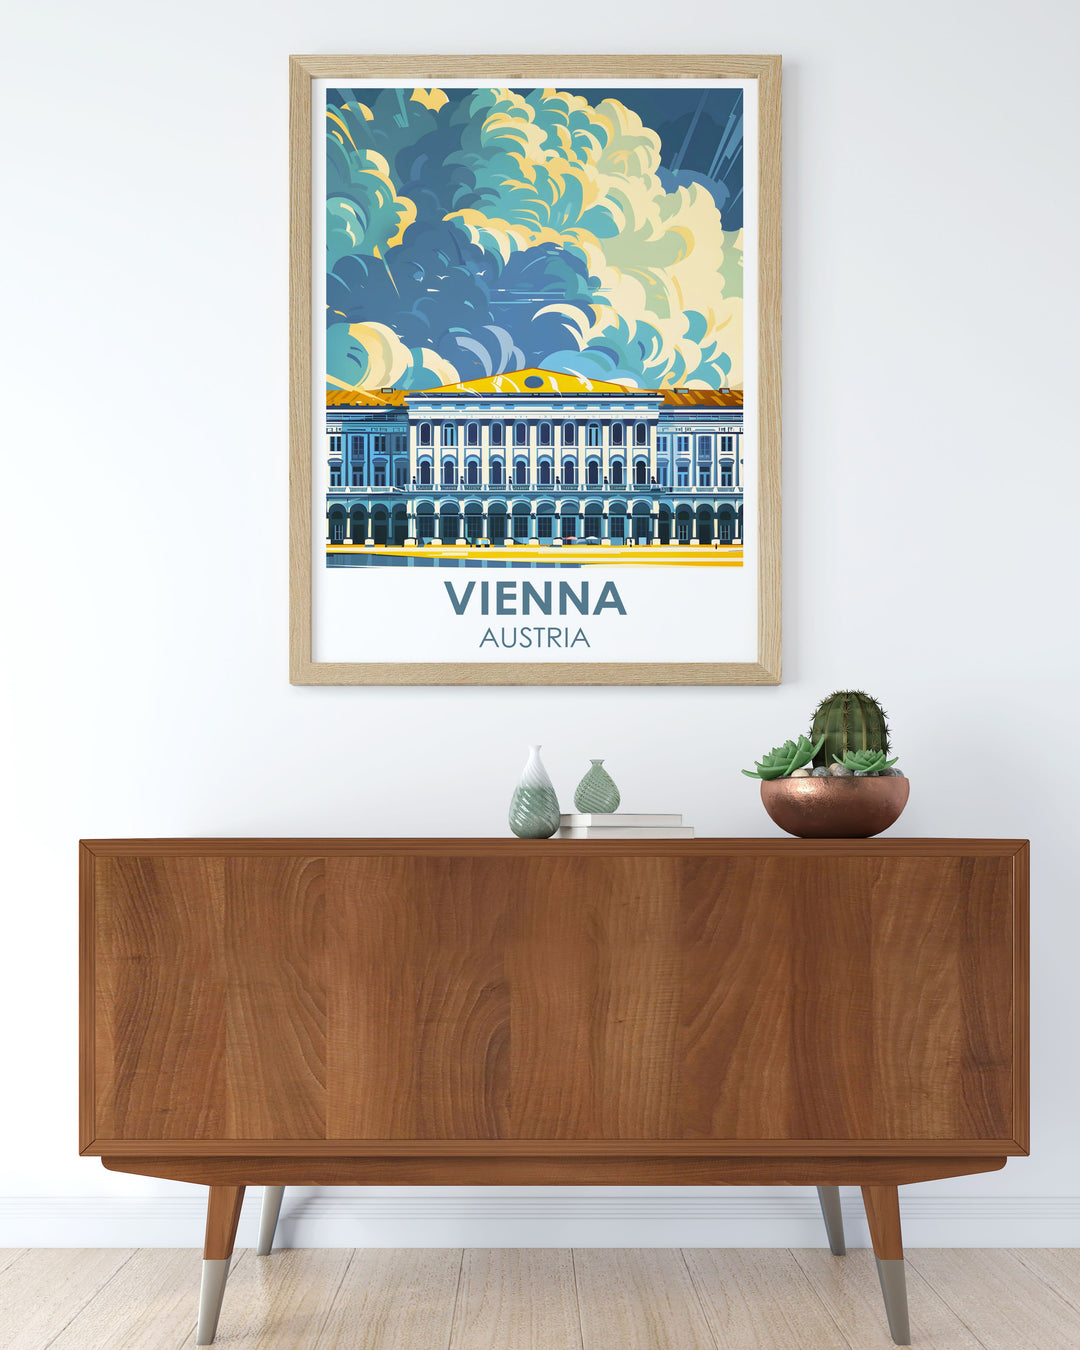 Beautiful Vienna Art Print depicting the magnificent schönbrunn palace a timeless piece for those who appreciate fine art and the cultural significance of Vienna